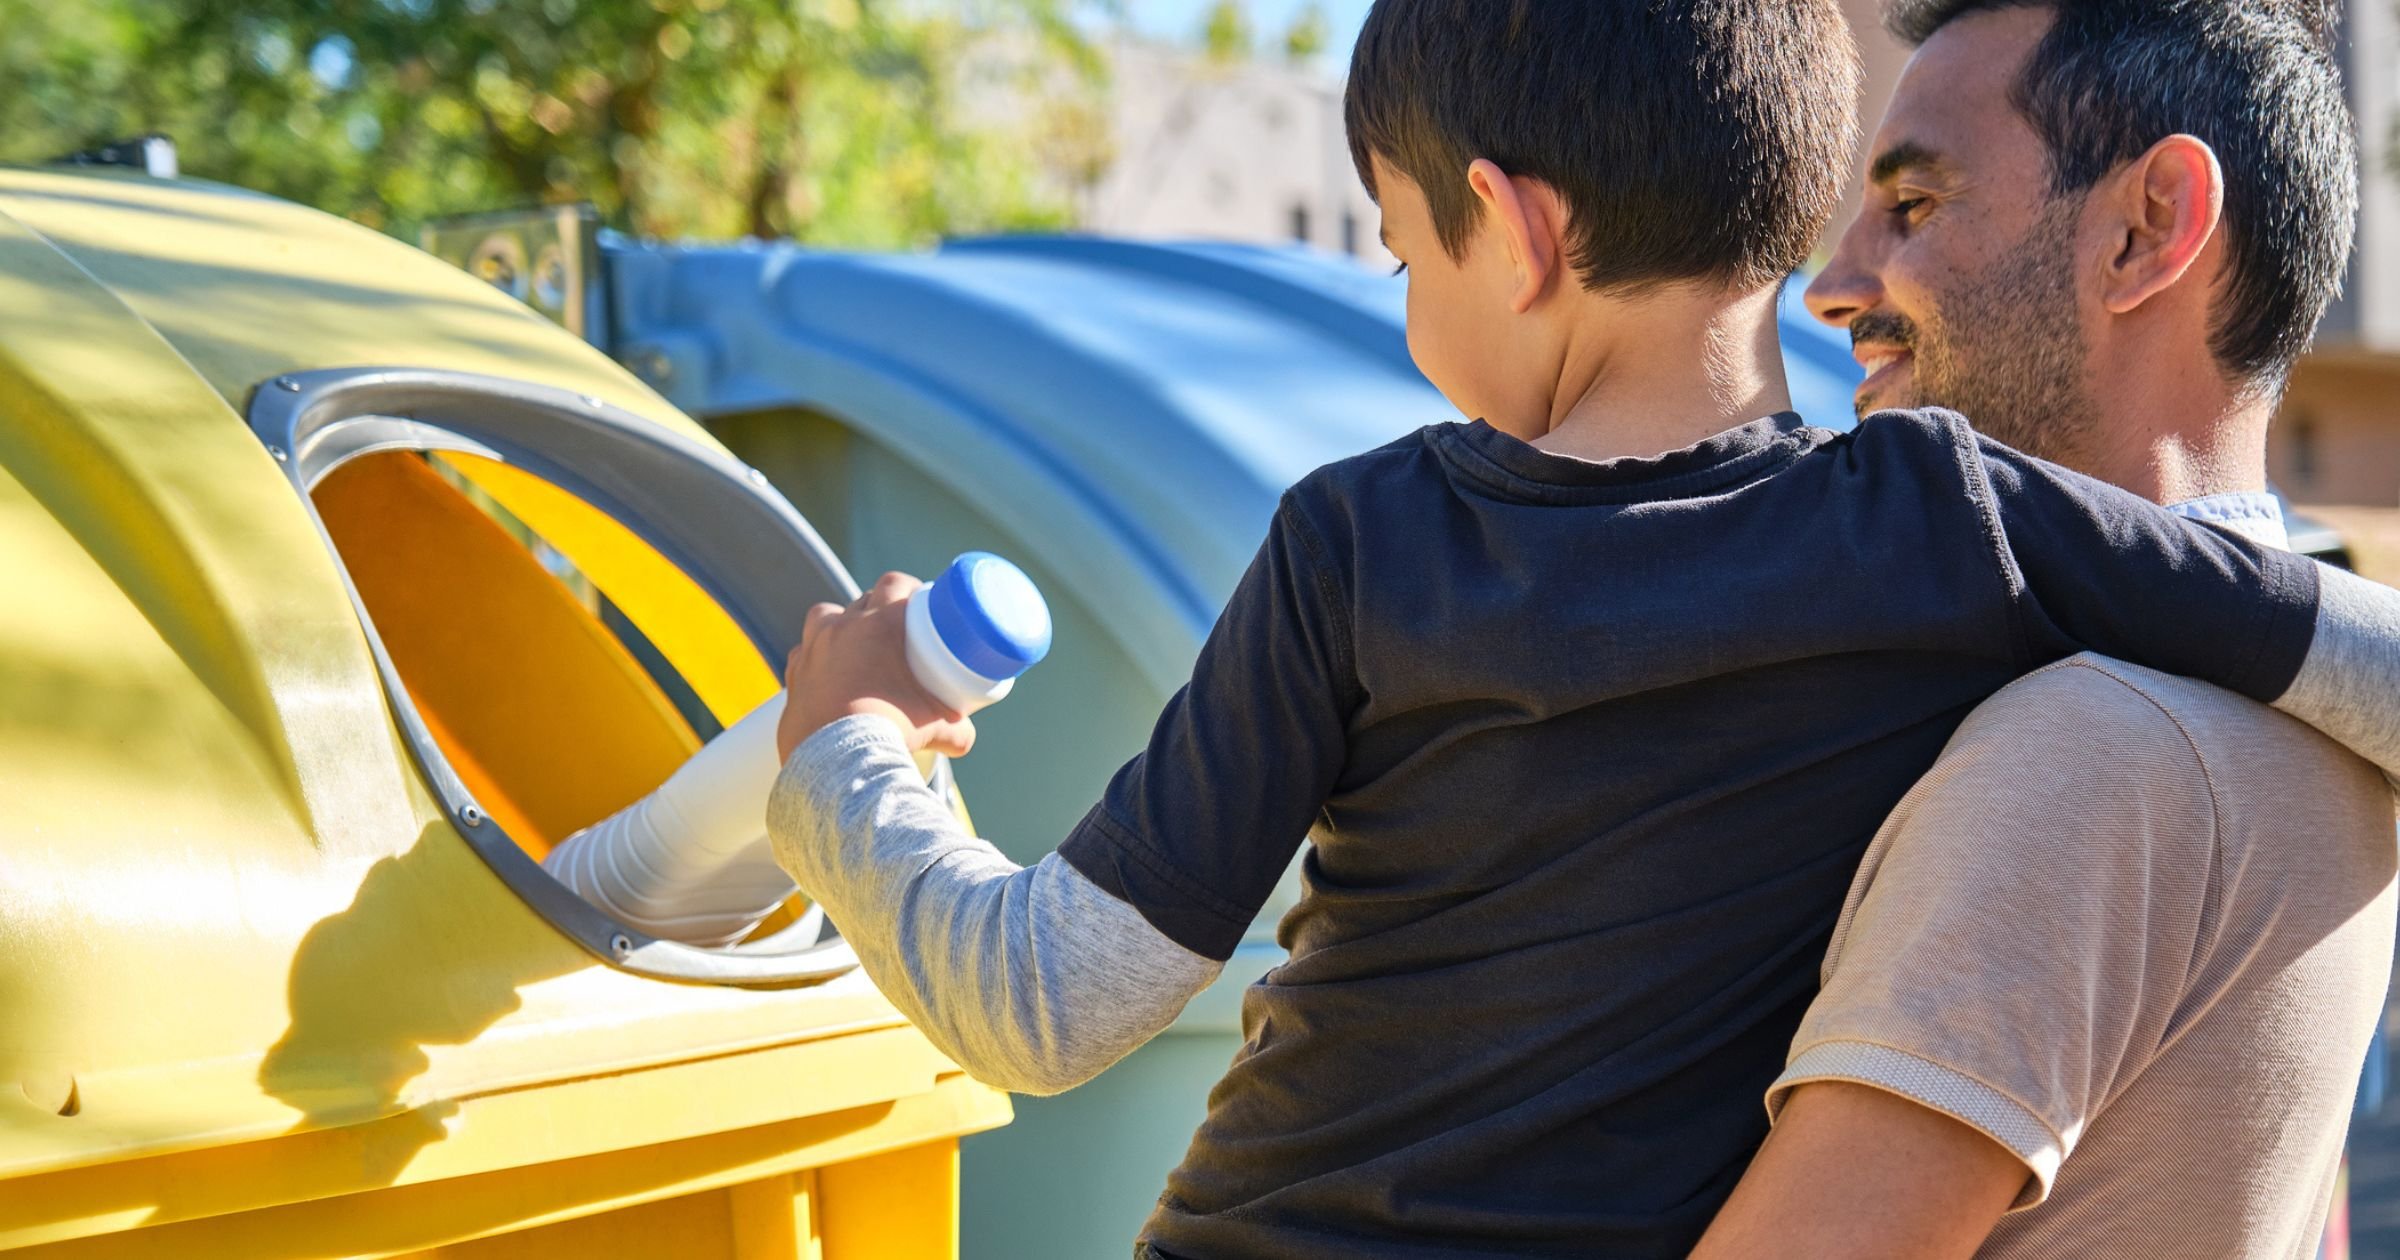 Father and son putting a plastic bottle in a yellow recycling bin